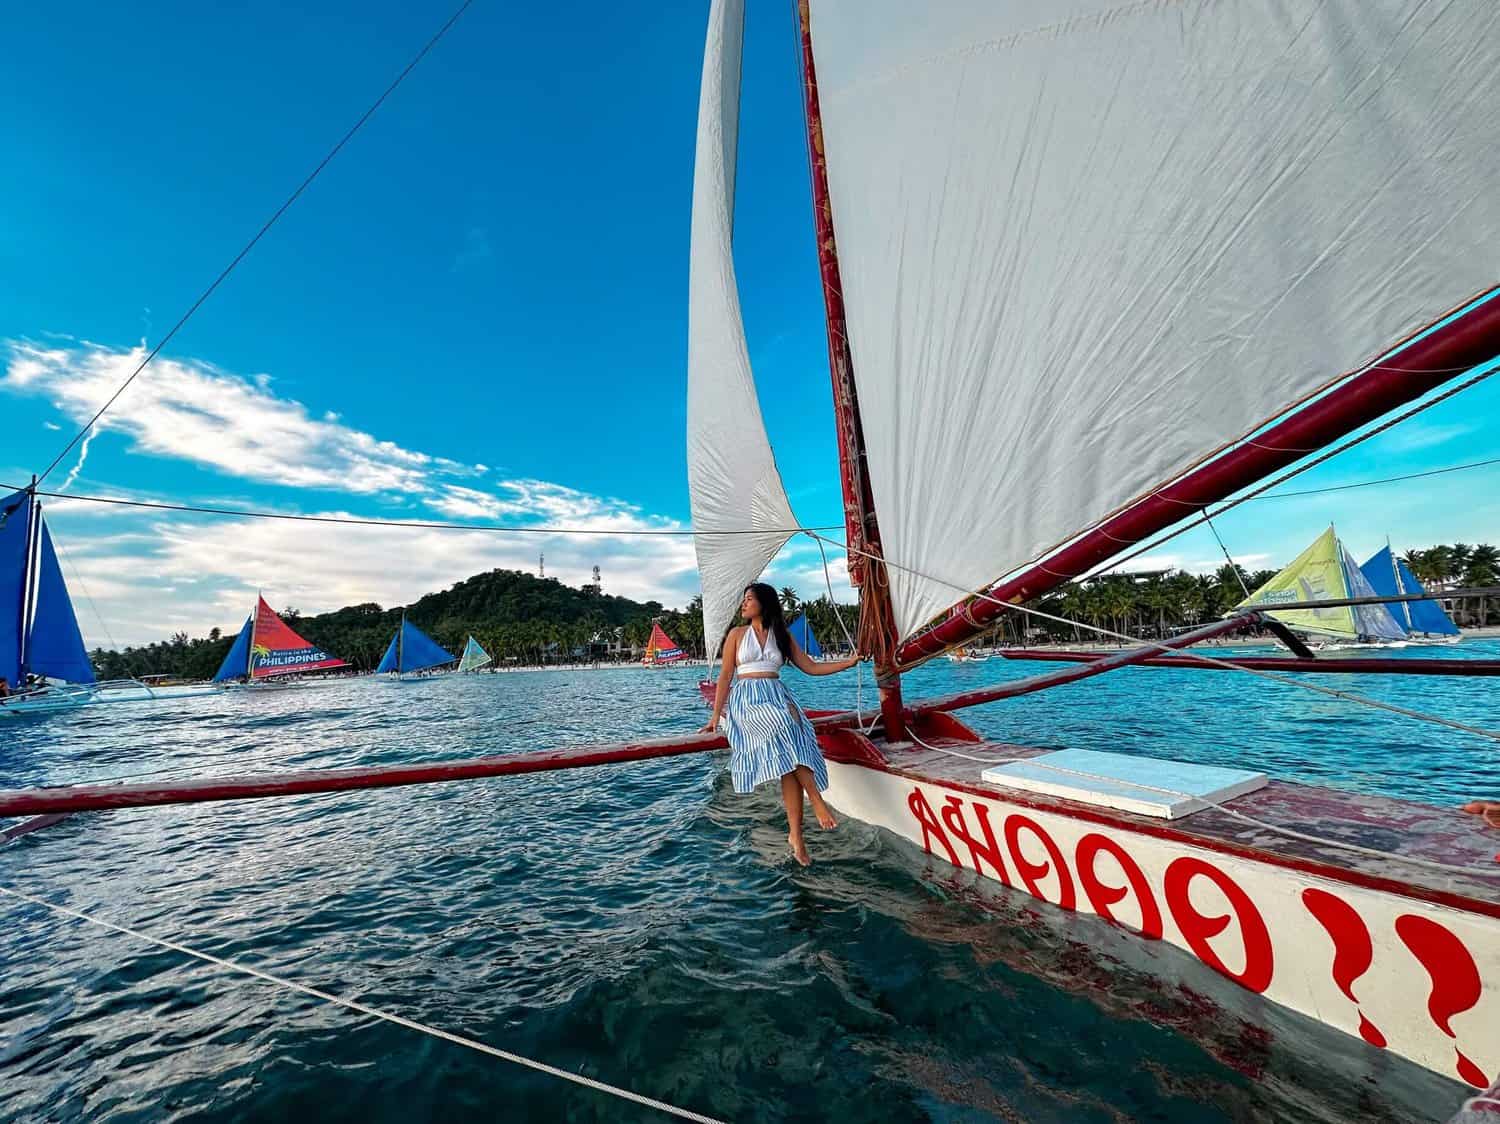 I am siting on a paraw sailboat during paraw sailing, one of the water activities in Boracay.